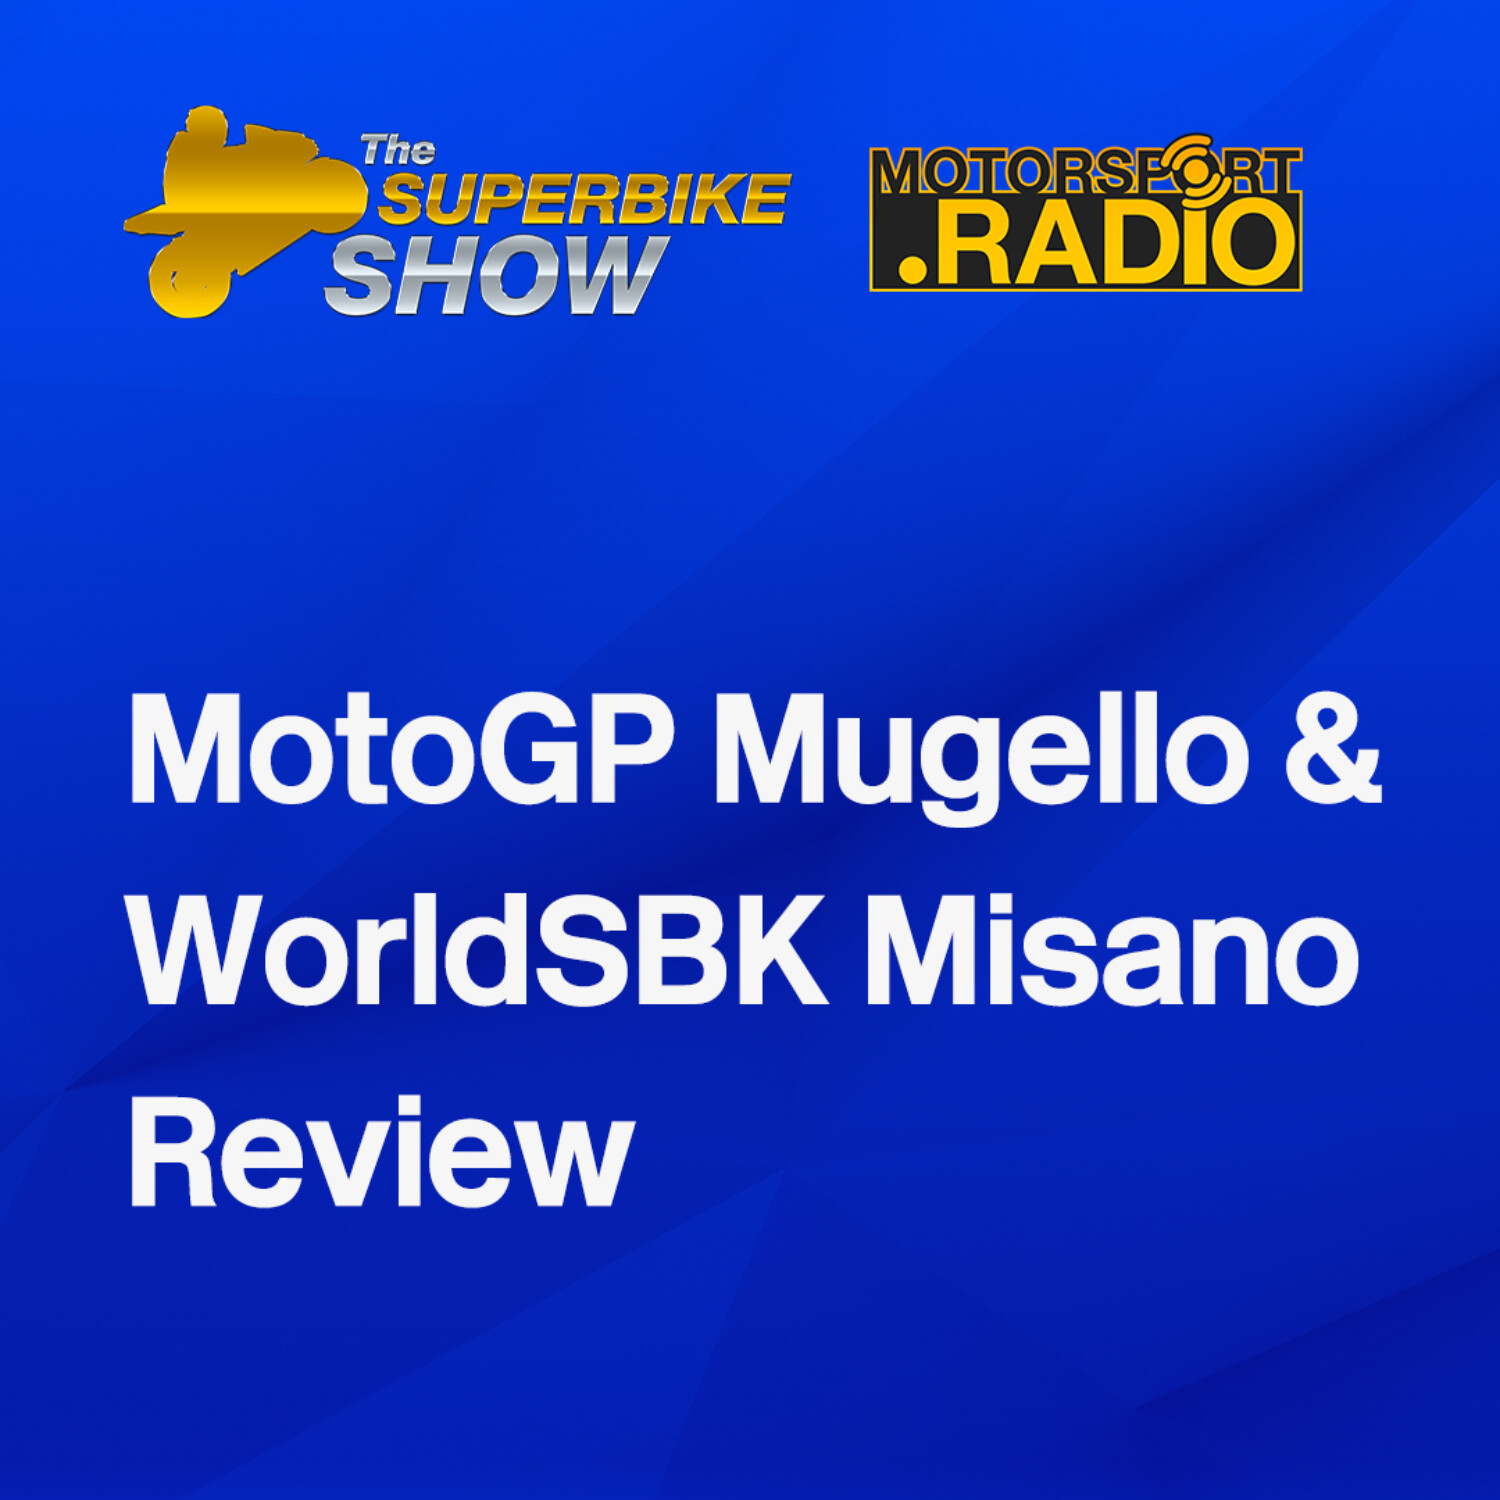 #MotoGP #ItalianGP Preview and #EmiliaRomagnaWorldSBK Review